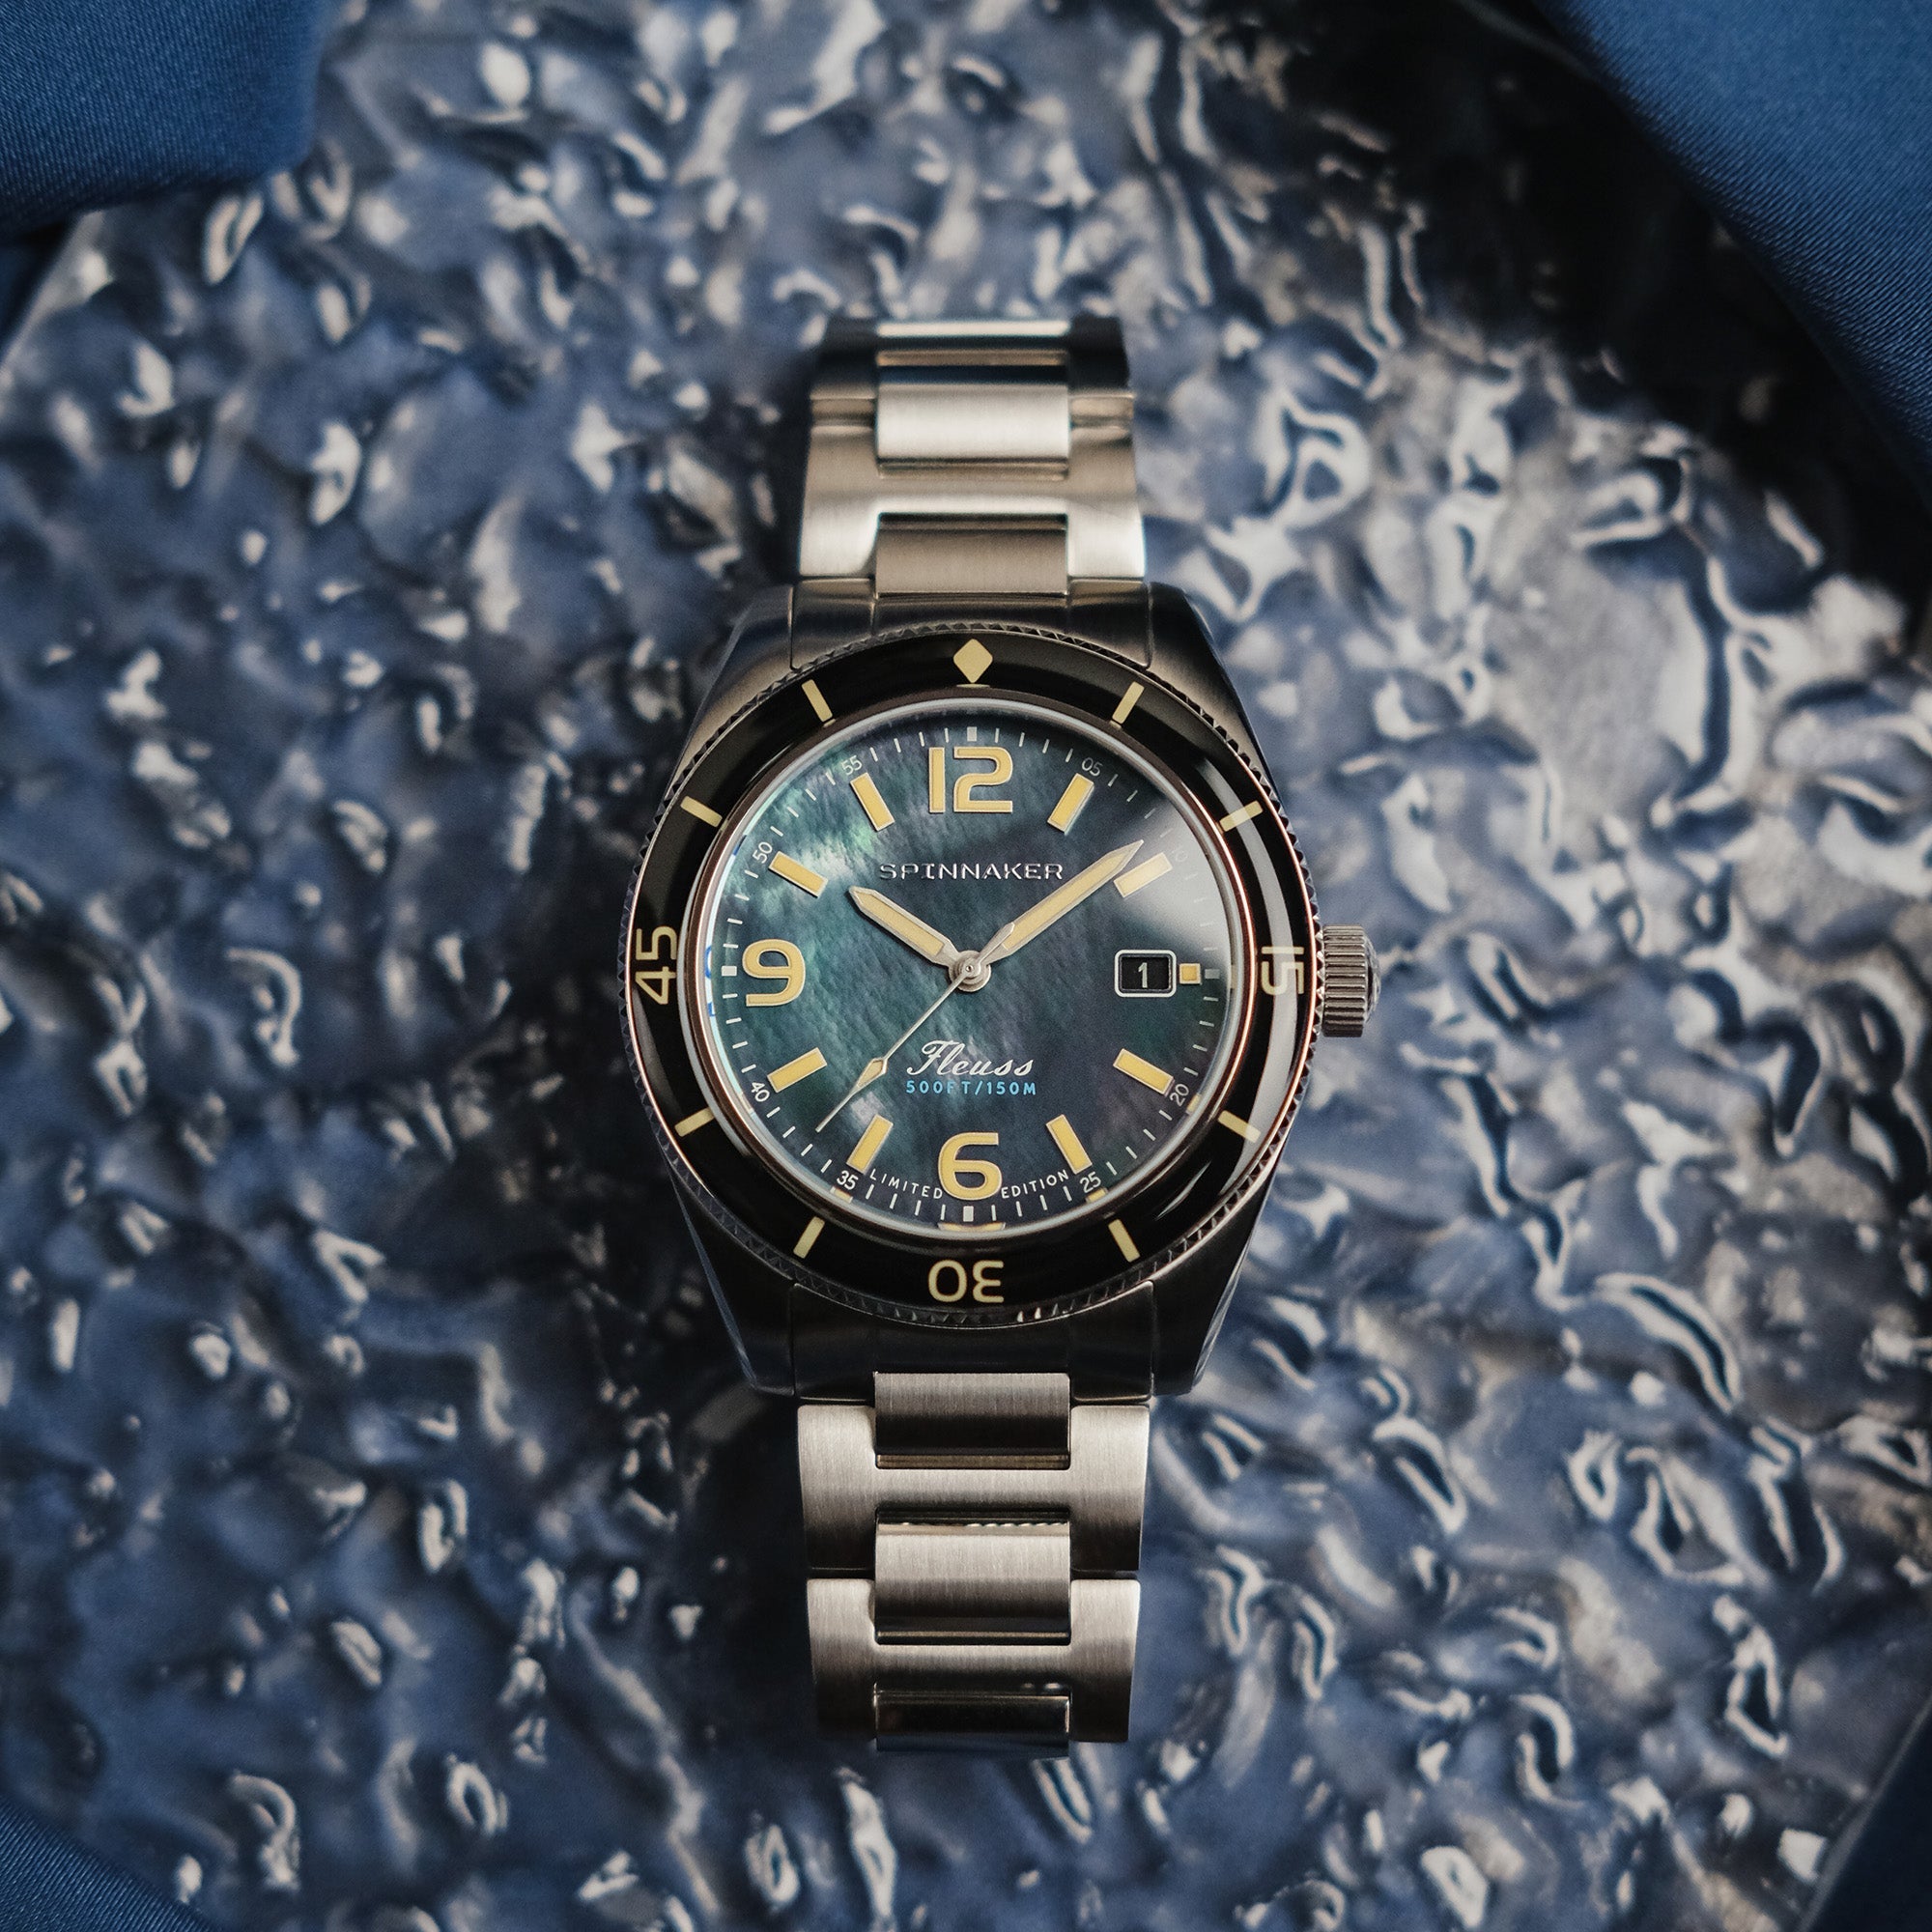 Spinnaker Spinnaker Fleuss Automatic Midnight Pearl Diver Limited Edition Men's Watch SP-5108-11